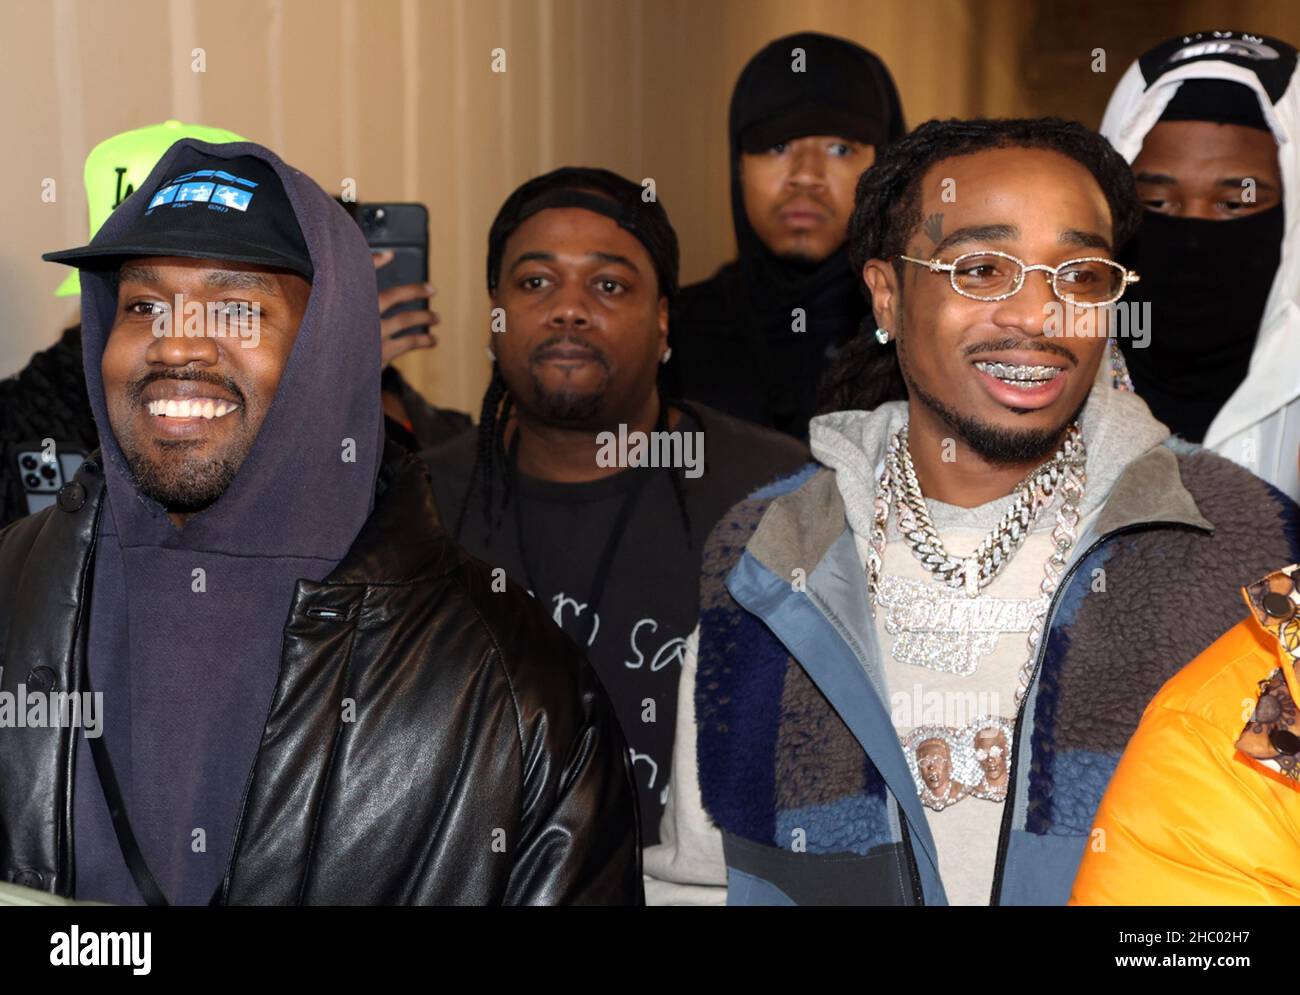 Los Angeles, Ca. 21st Dec, 2021. Kanye West and Quavo at Offset's 30th Birthday Party hosted by Cardi B at Sneakertopia LA in Los Angeles, California on December 21, 2021. Credit: Walik Goshorn/Media Punch/Alamy Live News Stock Photo